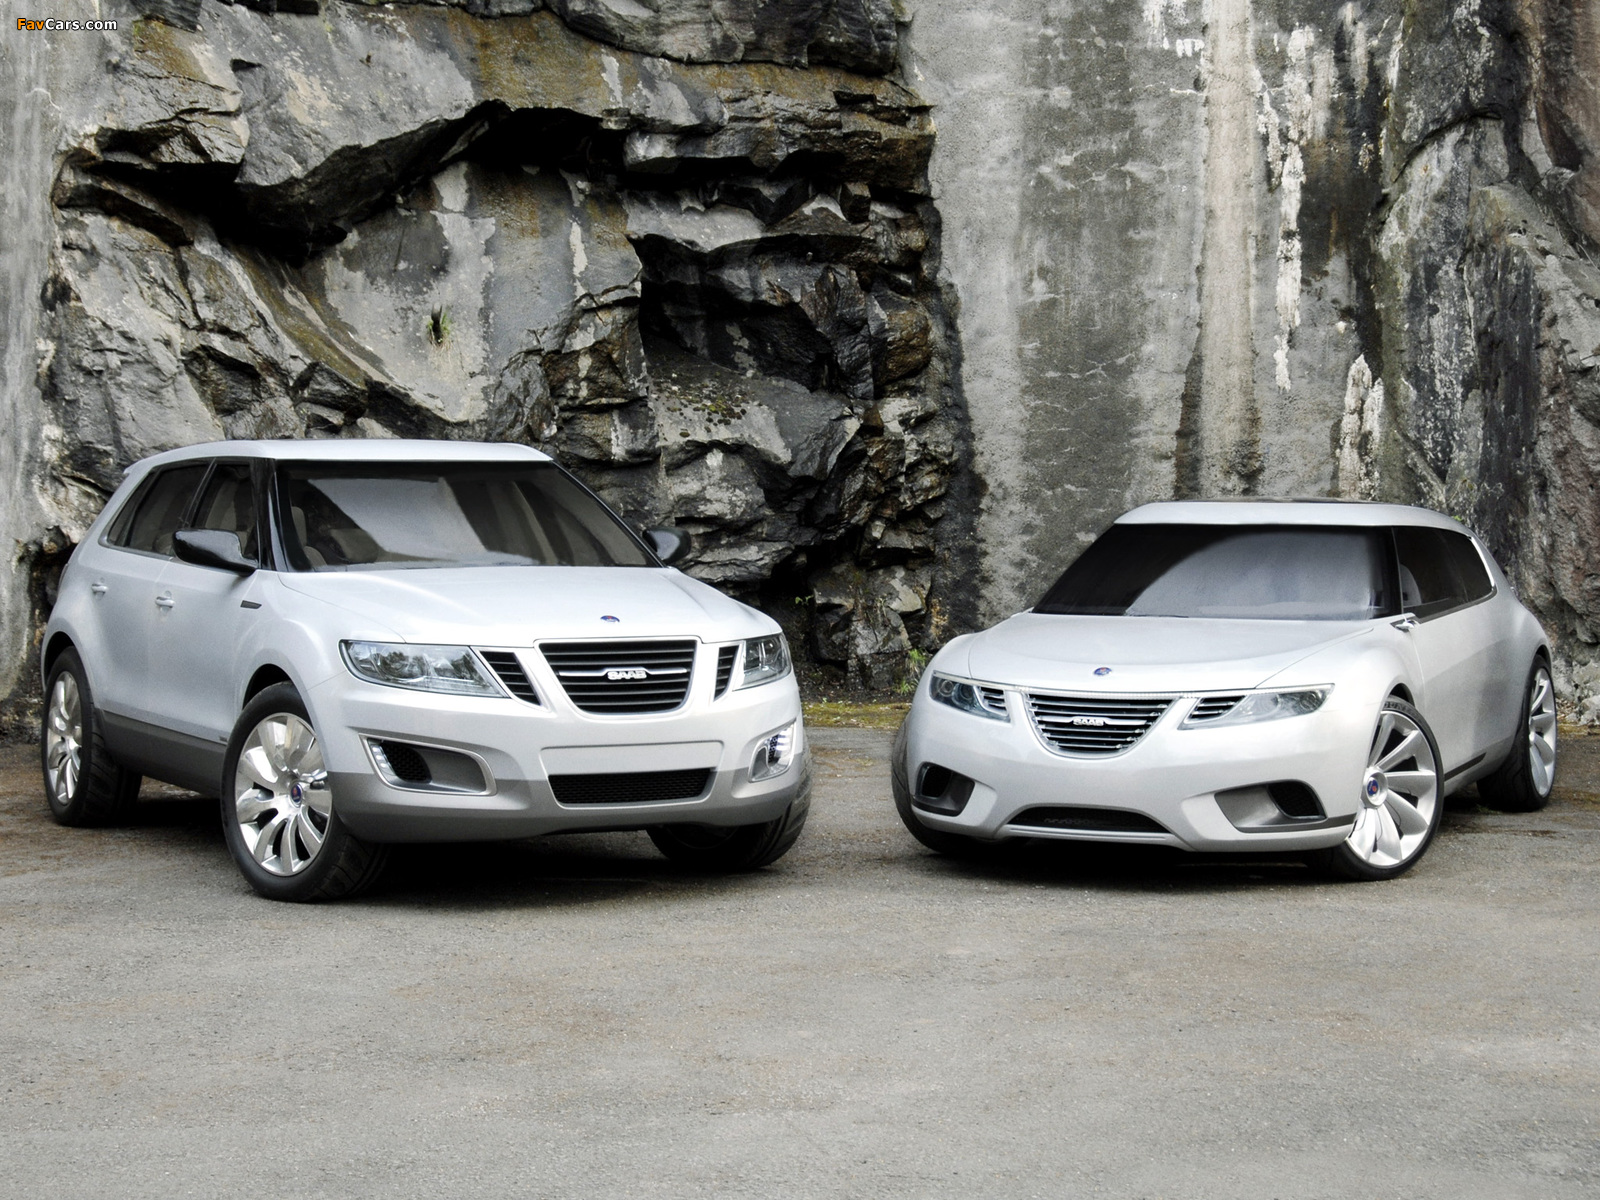 Pictures of Saab (1600 x 1200)